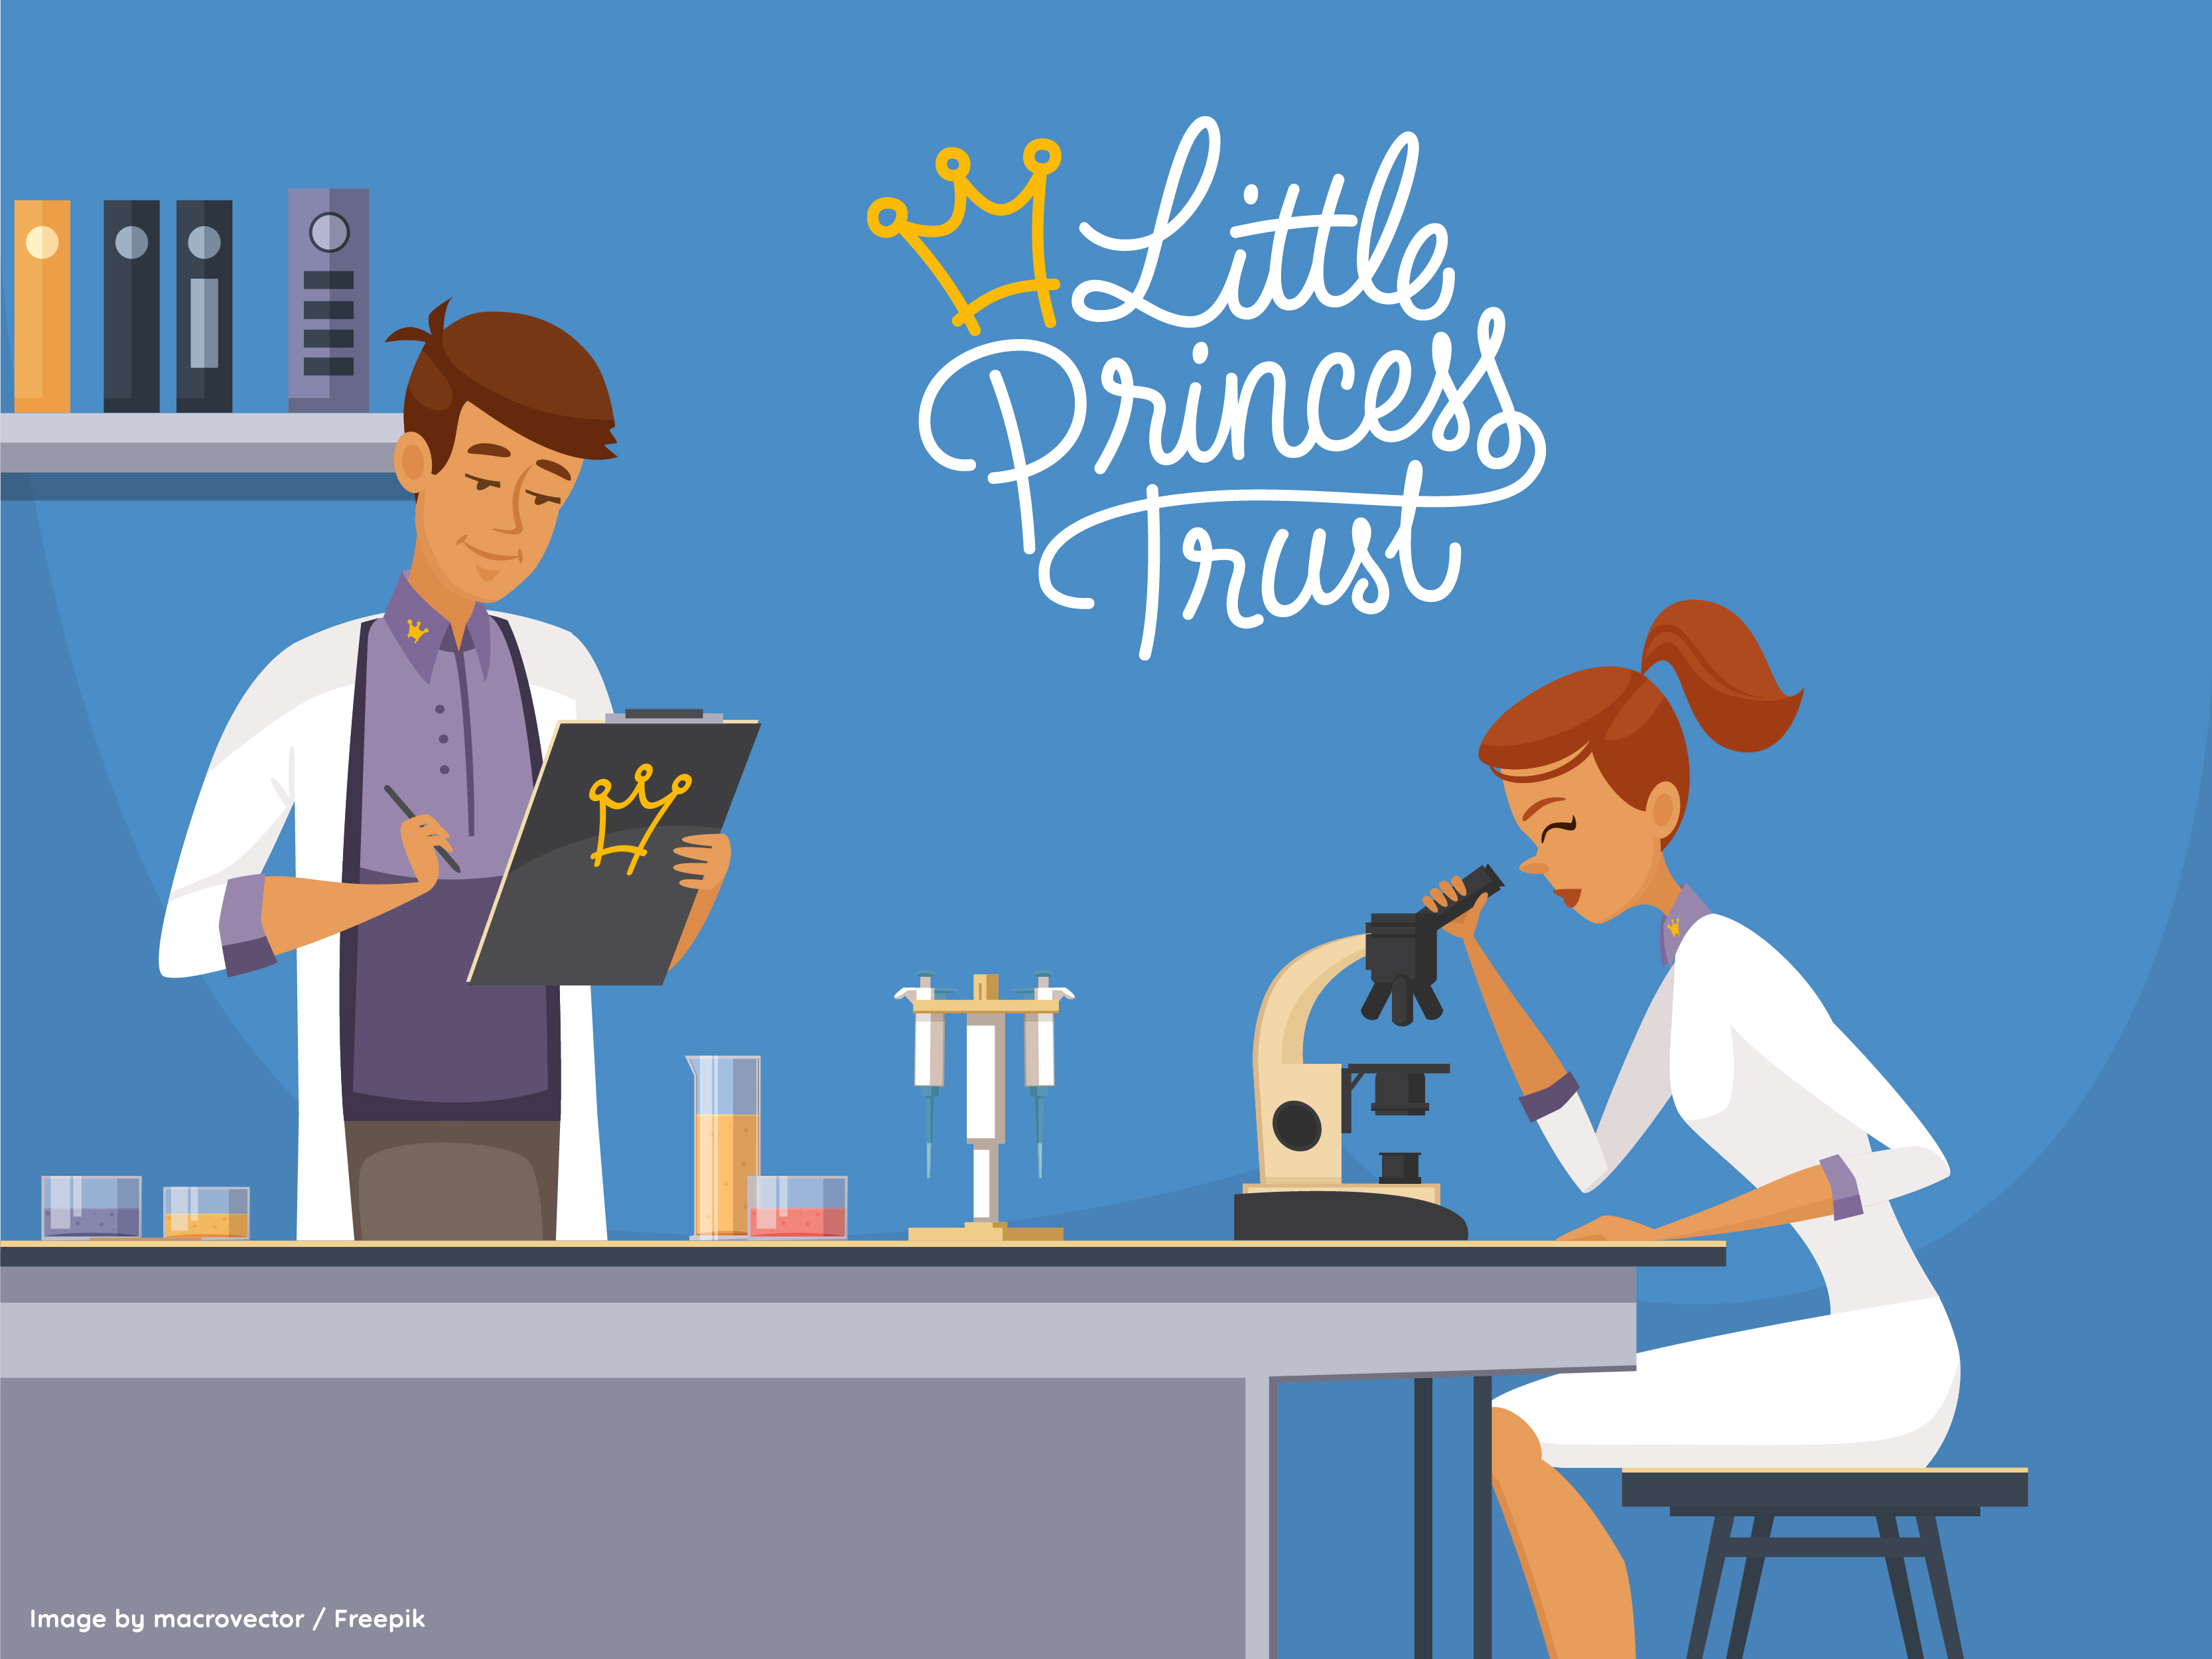 The Little Princess Trust is proud to fund childhood cancer research.